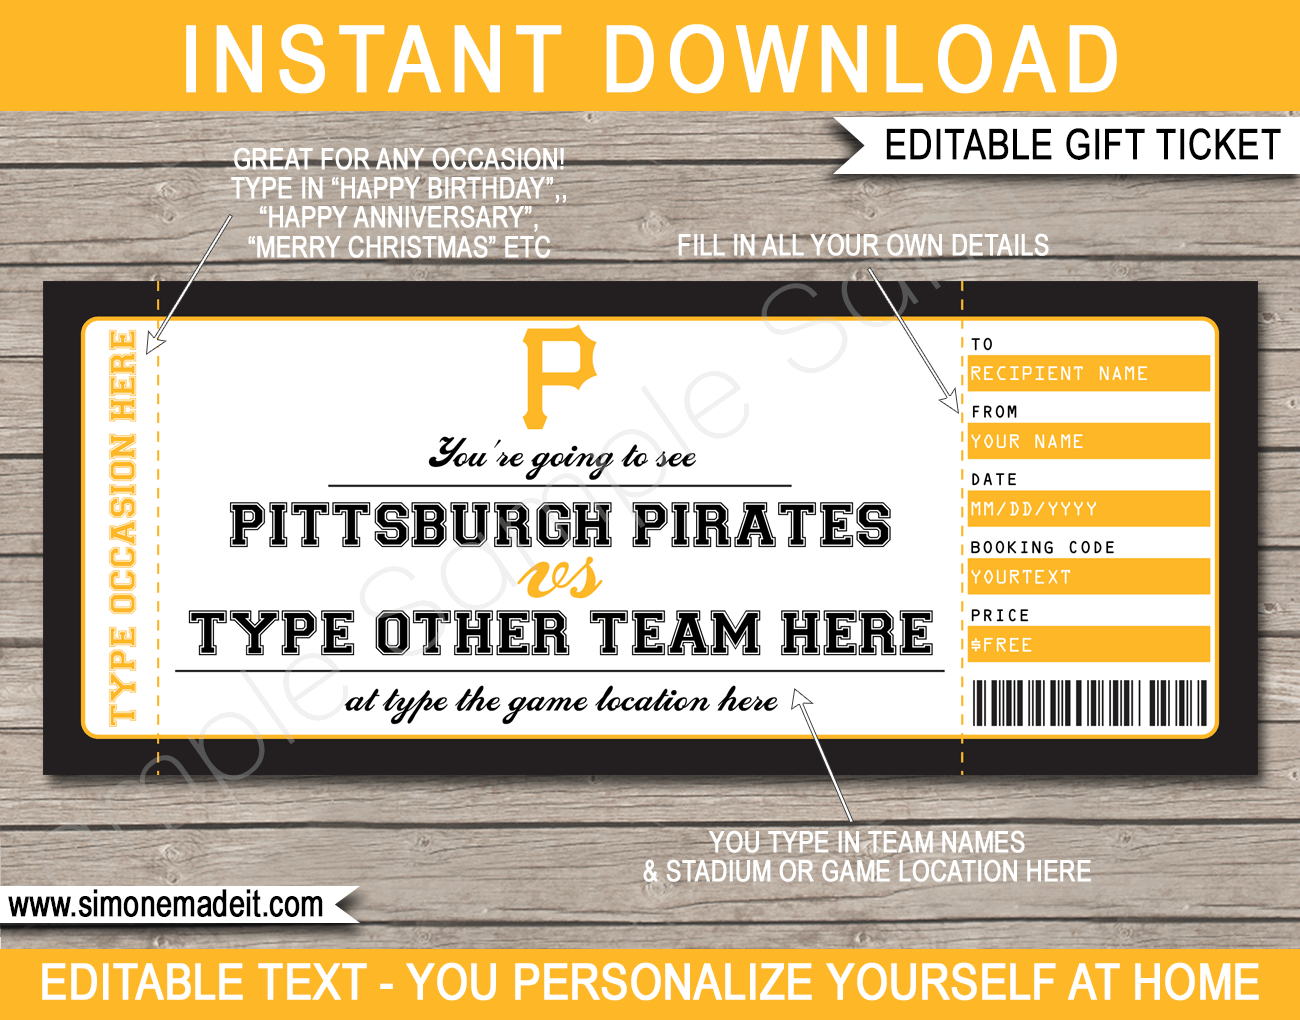 Happy MLB Opening Day, Pittsburgh Pirates Fans!